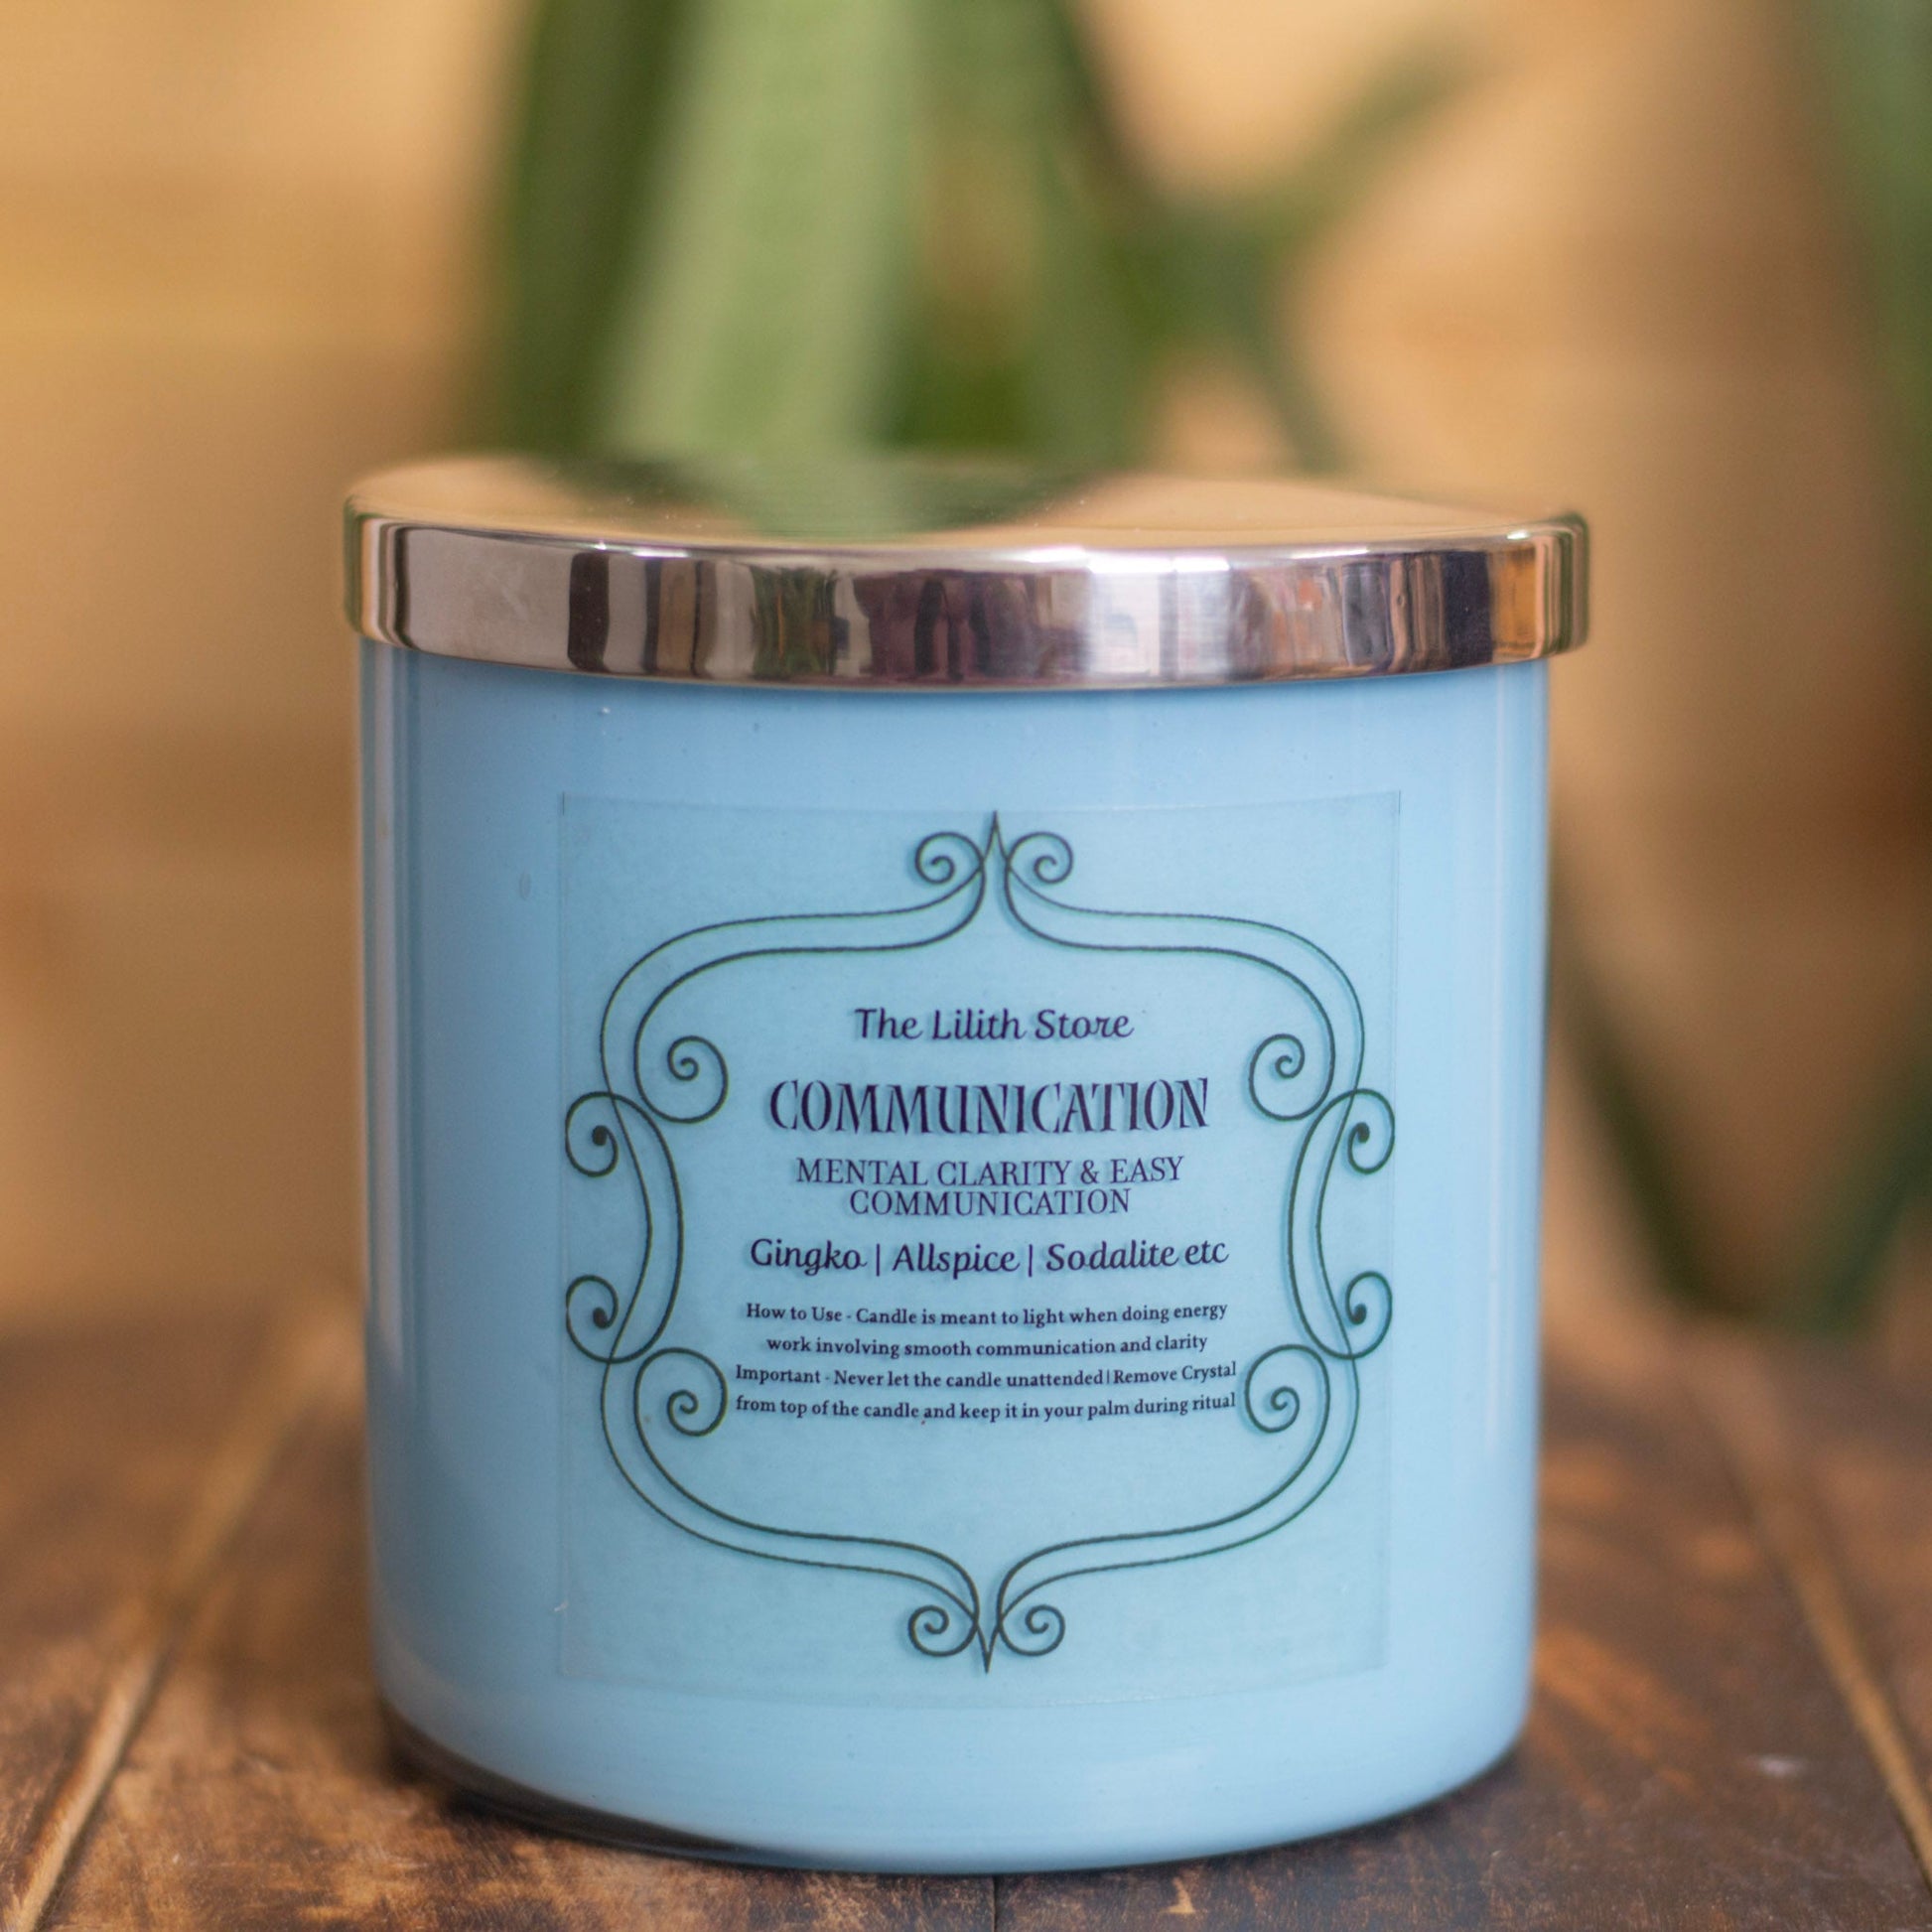 Communication & Mental Clarity Intention Candle | Ritual Candles